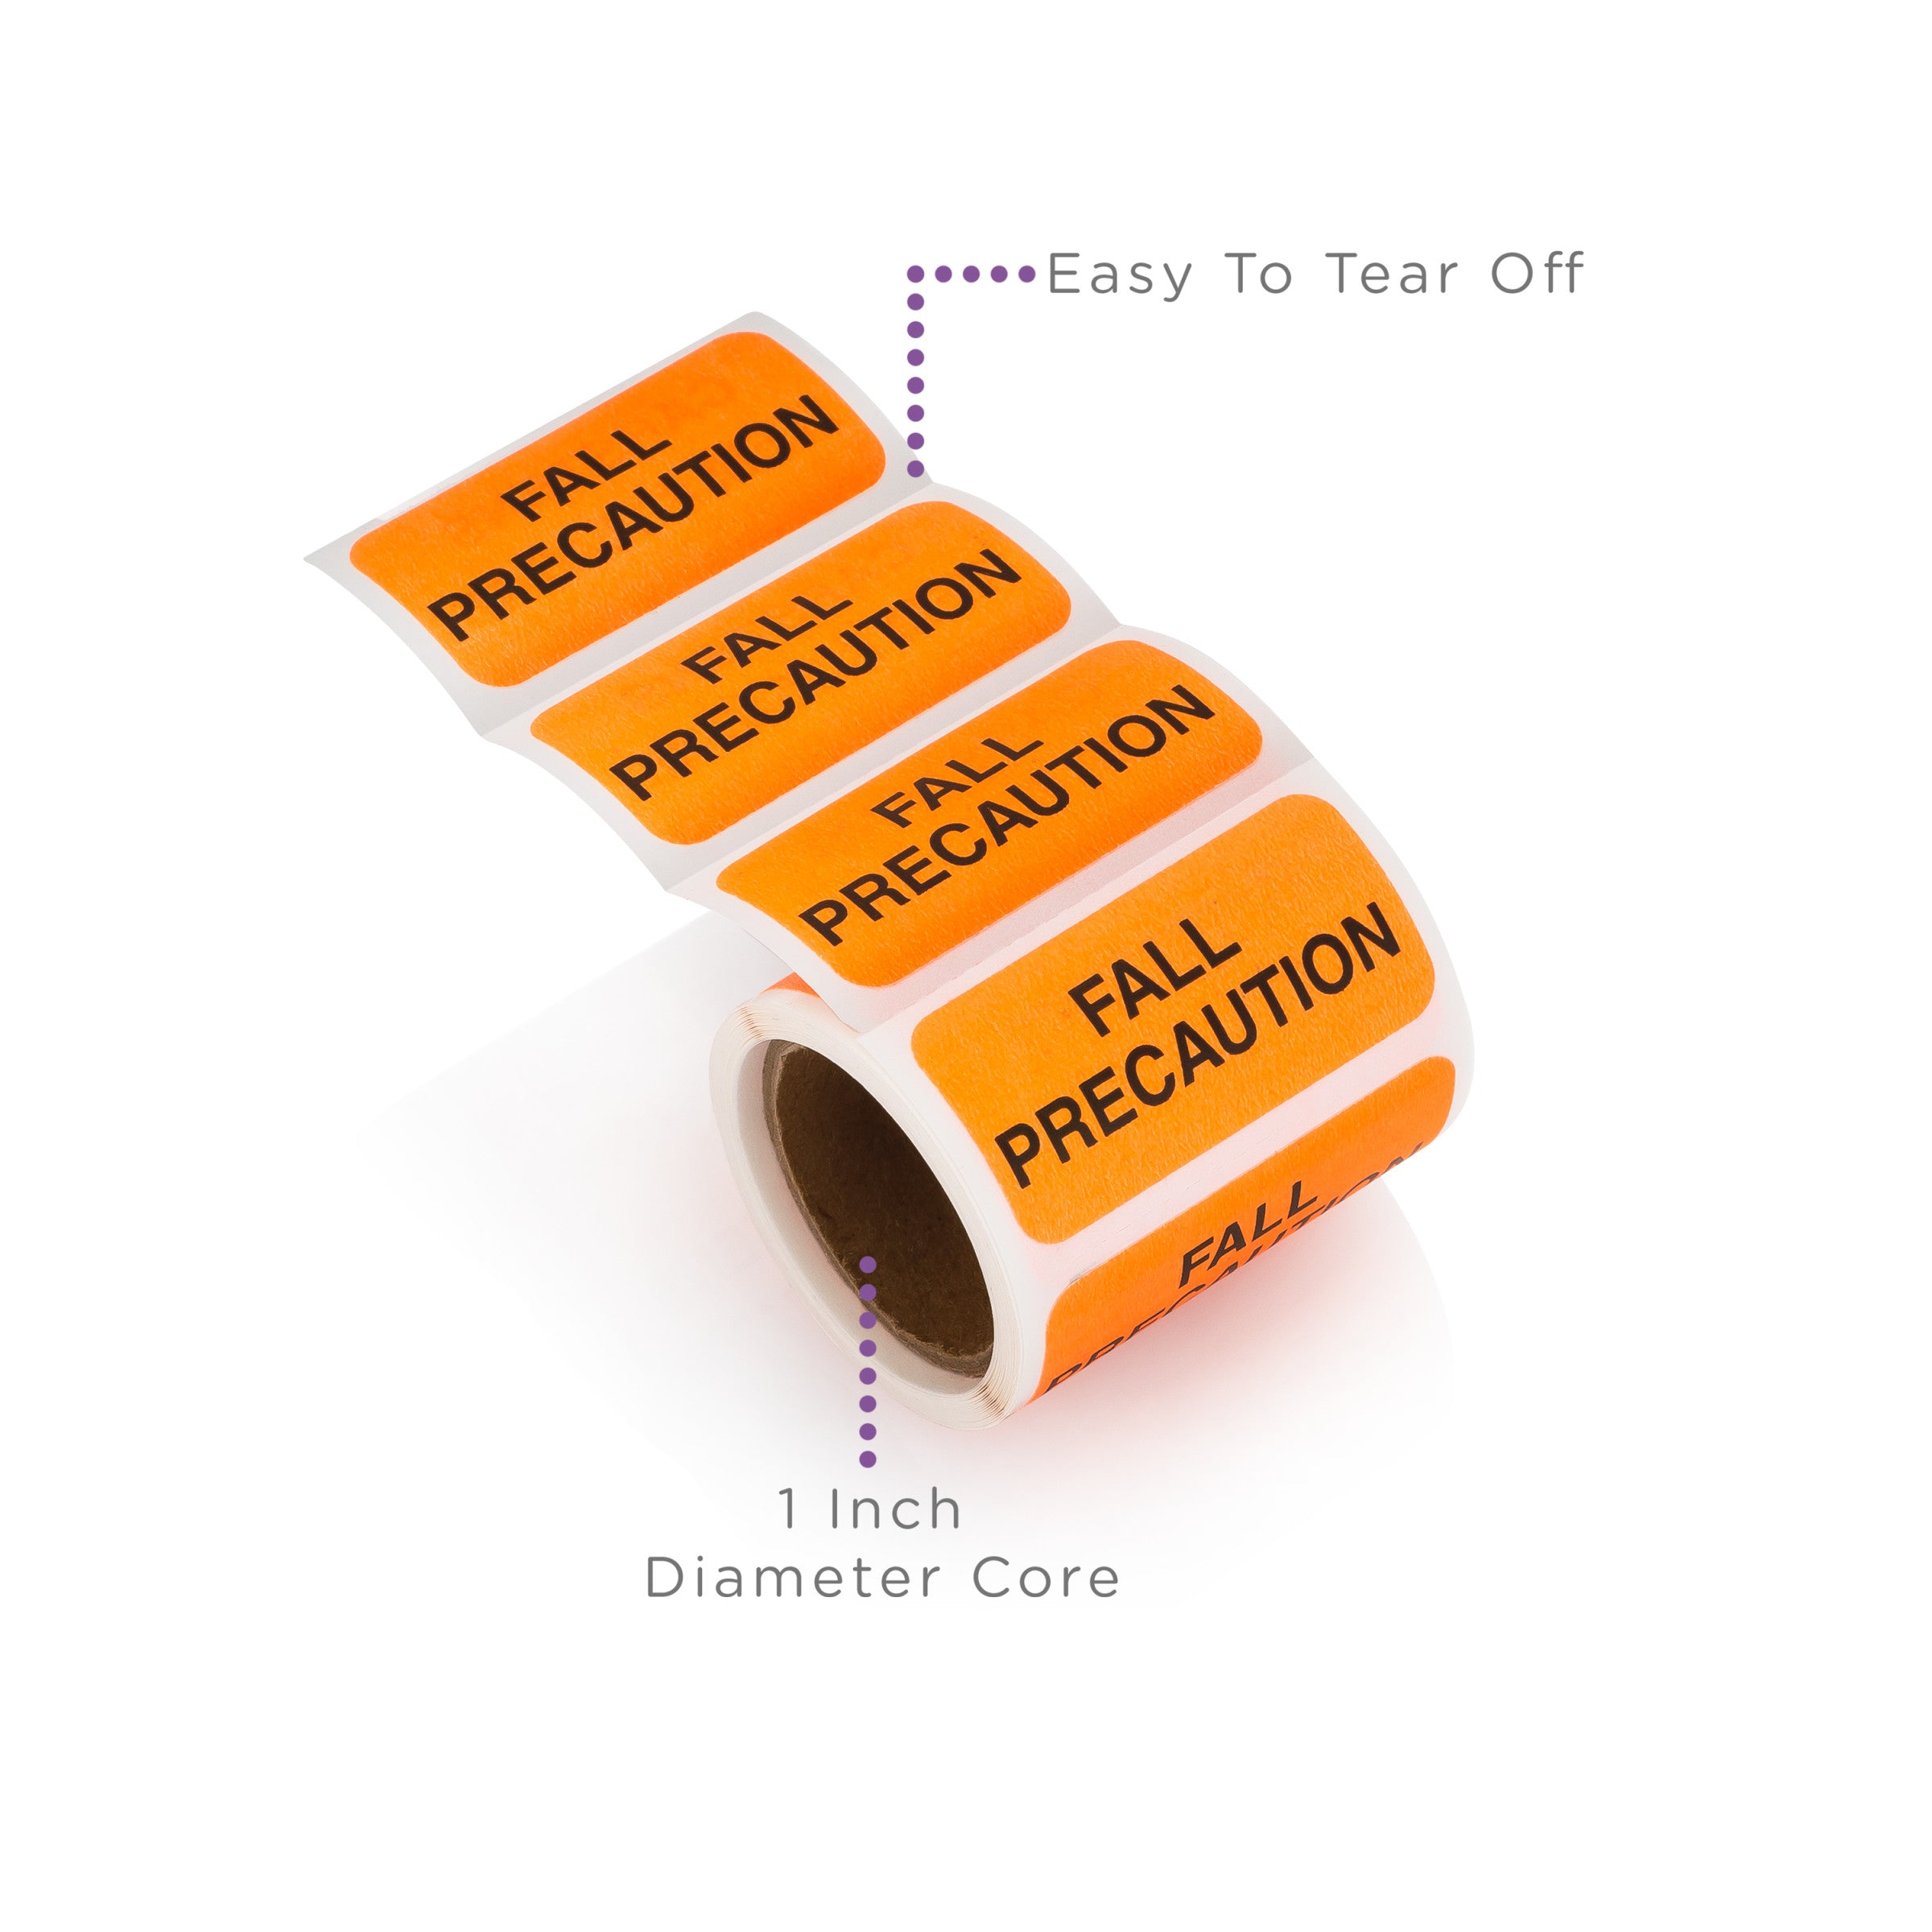 Fall Precaution Alert and Instruction Labels, Orange, W1.5" x H.75" (Roll of 100)